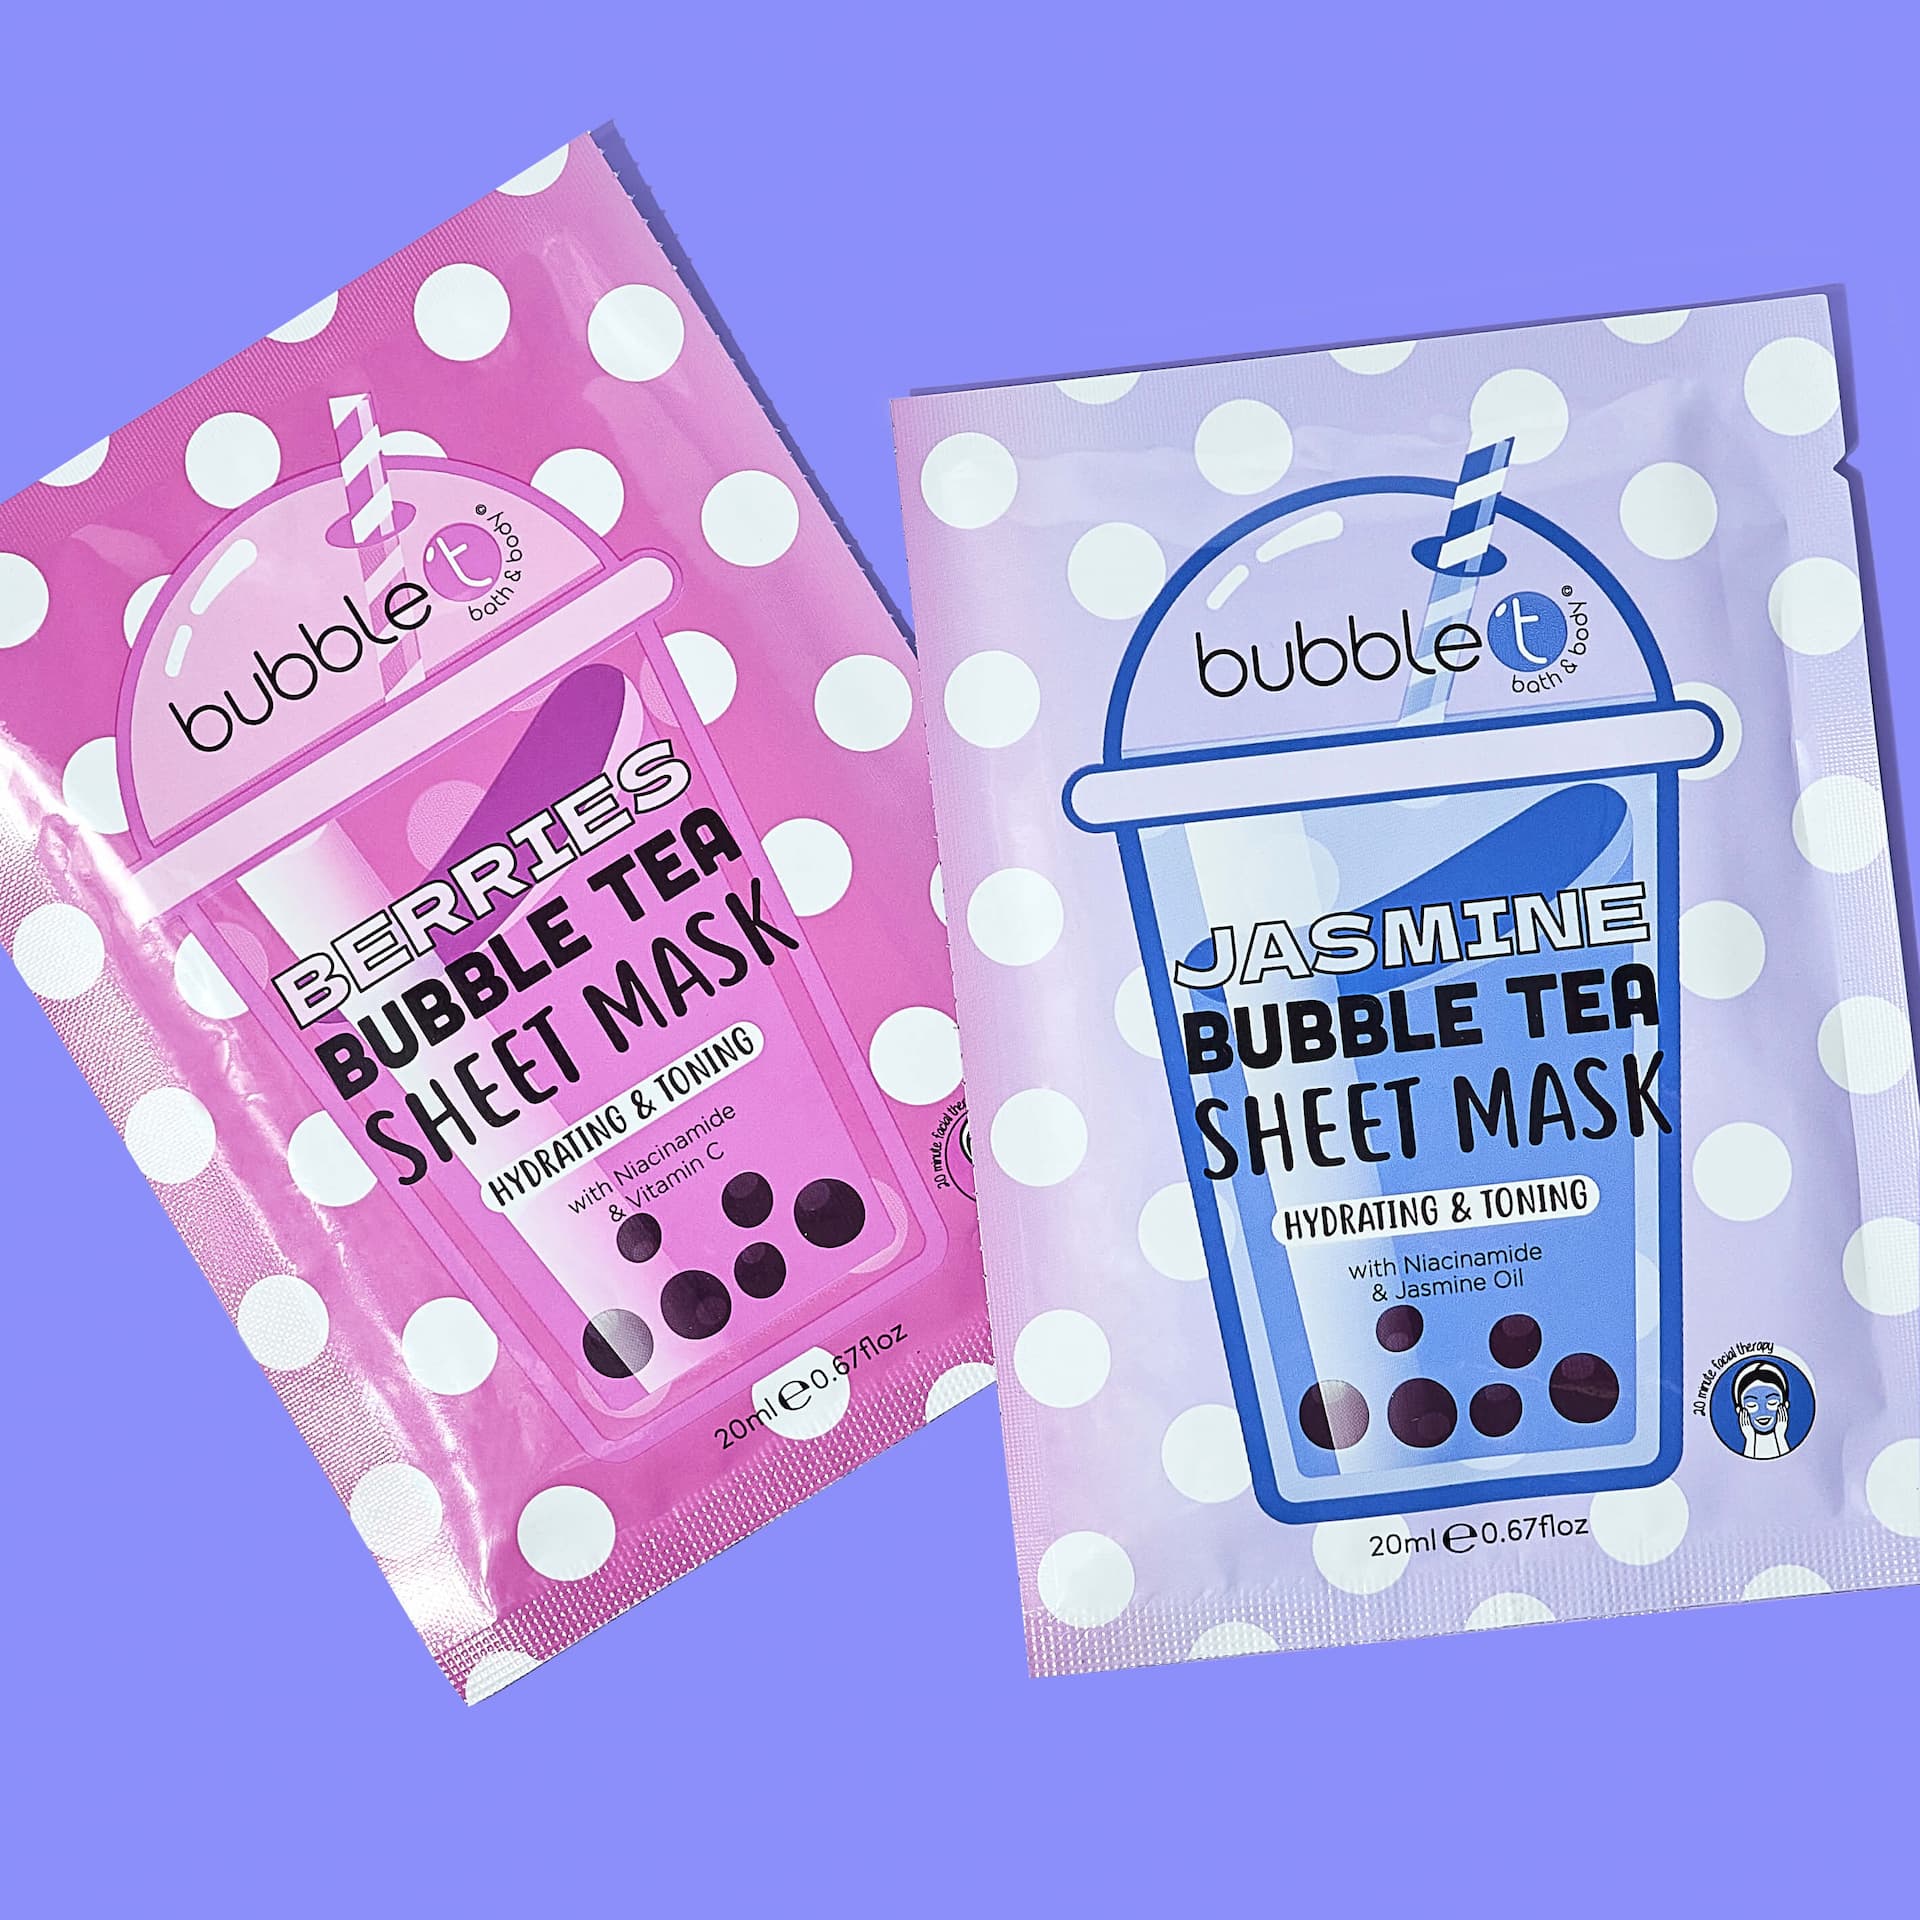 BUBBLE T COSMETICS Sheet Mask Duo in Berries and Jasmine